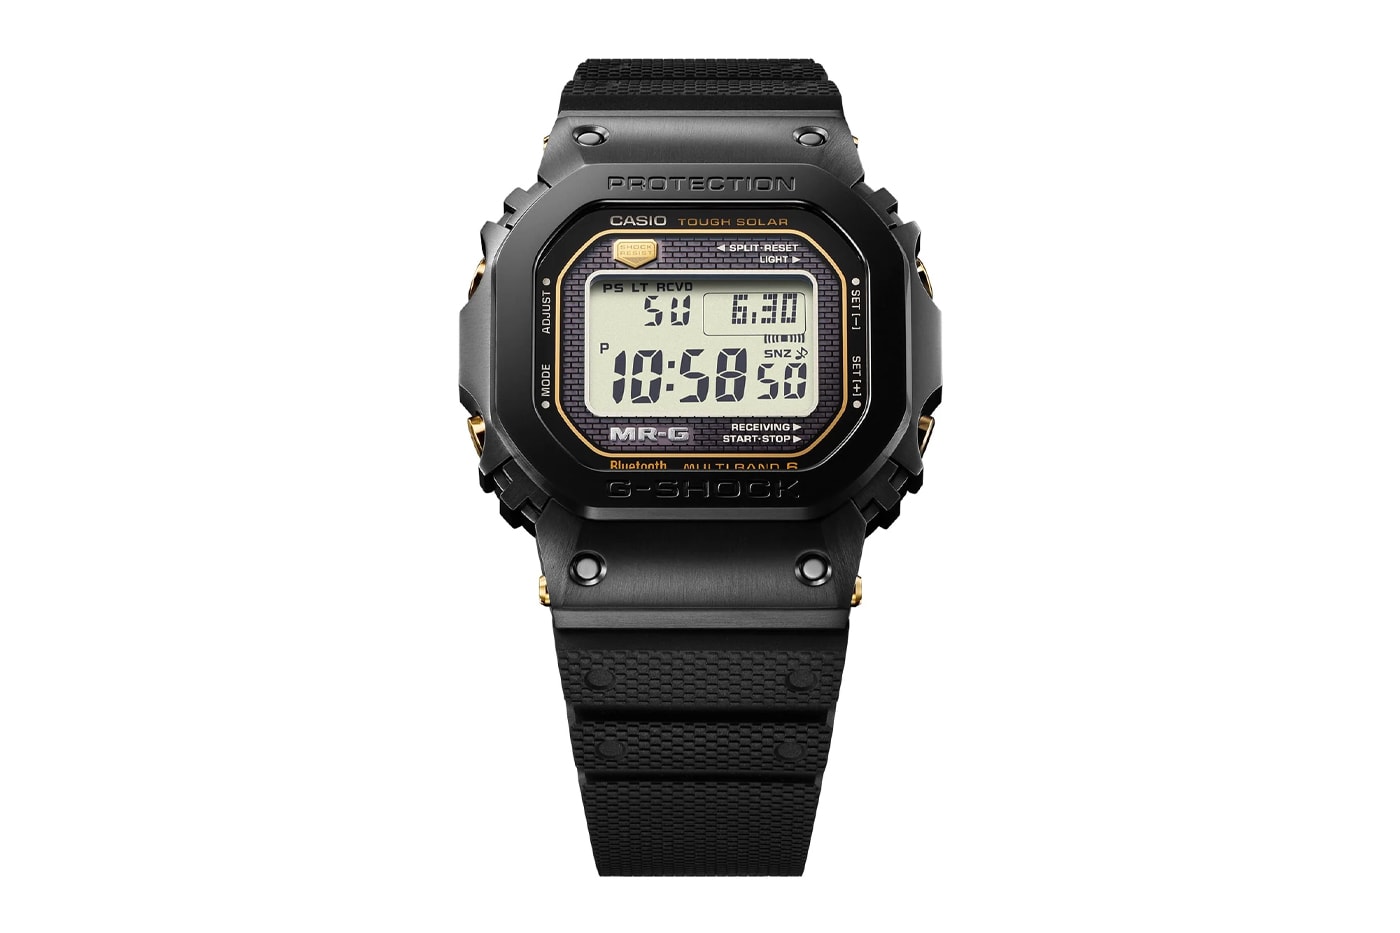 G-SHOCK MRGB5000 watch silhouette classic iconic timeless model bezel features digital interface shape price buy online now